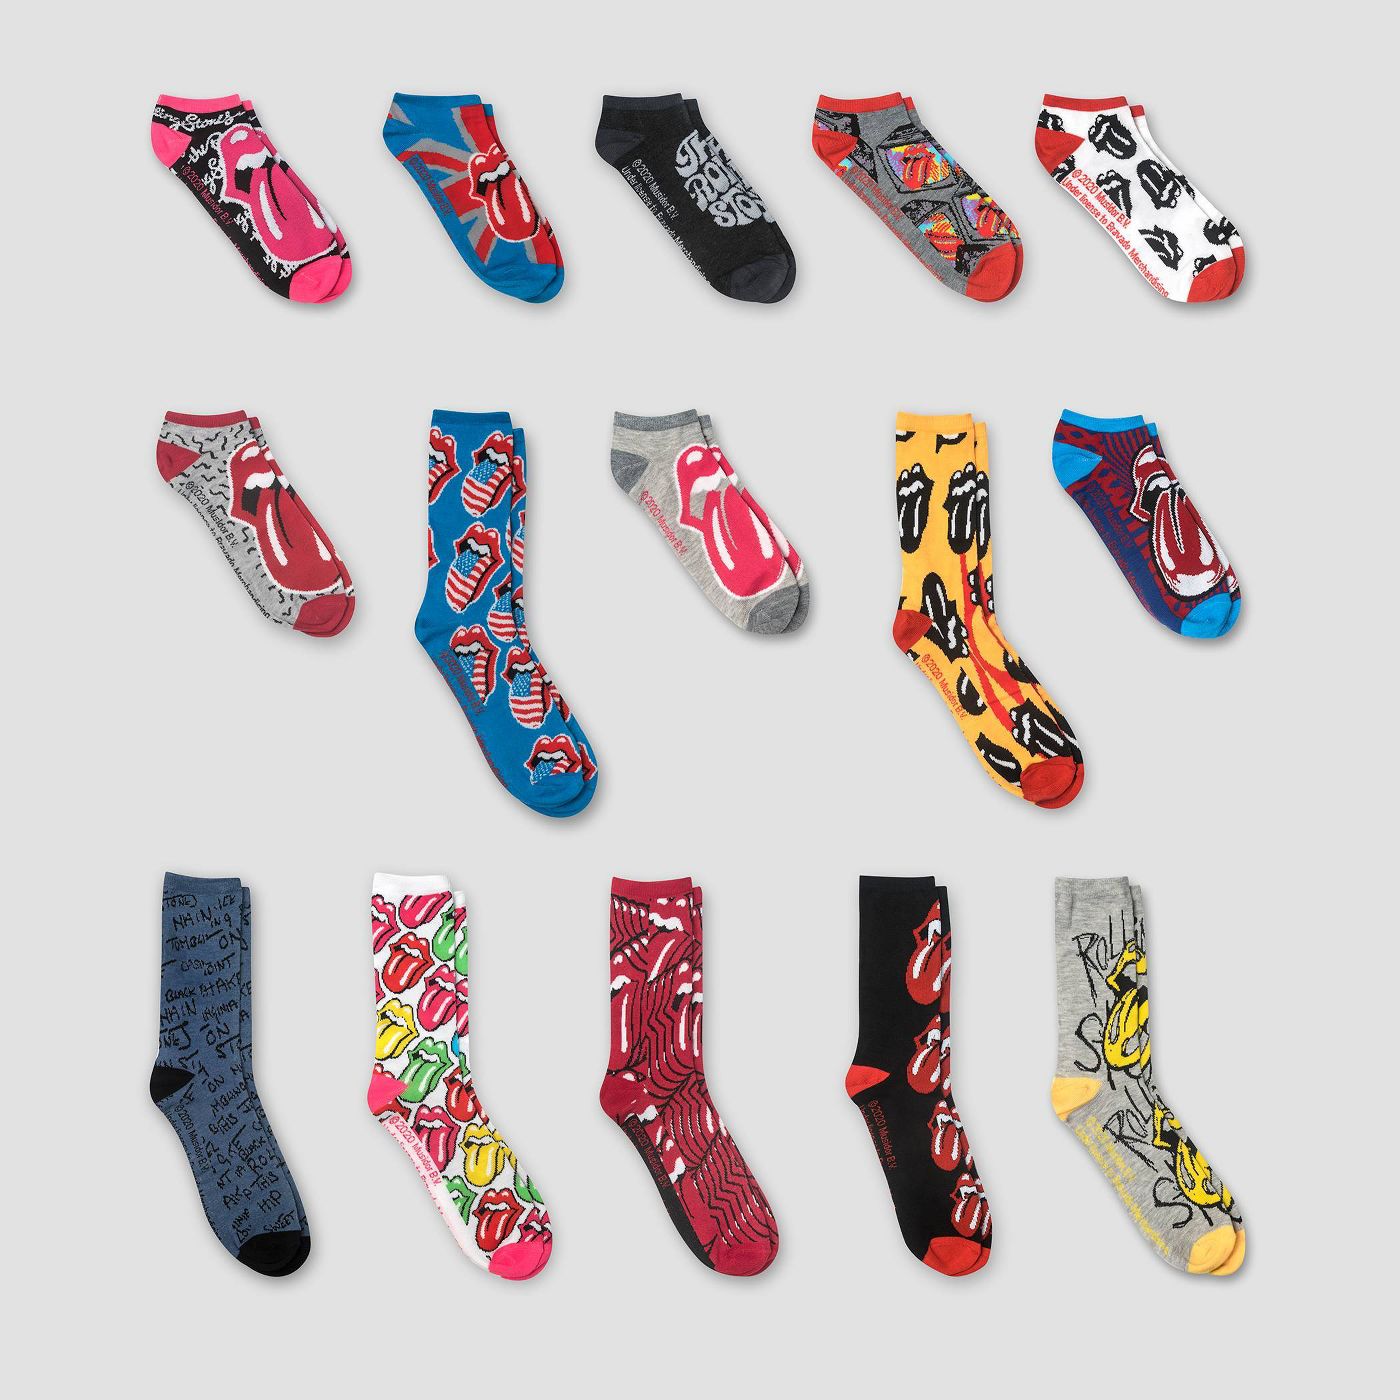 Men's The Rolling Stones 15 Days of Socks Advent Calendar - Assorted Colors One Size - image 1 of 5